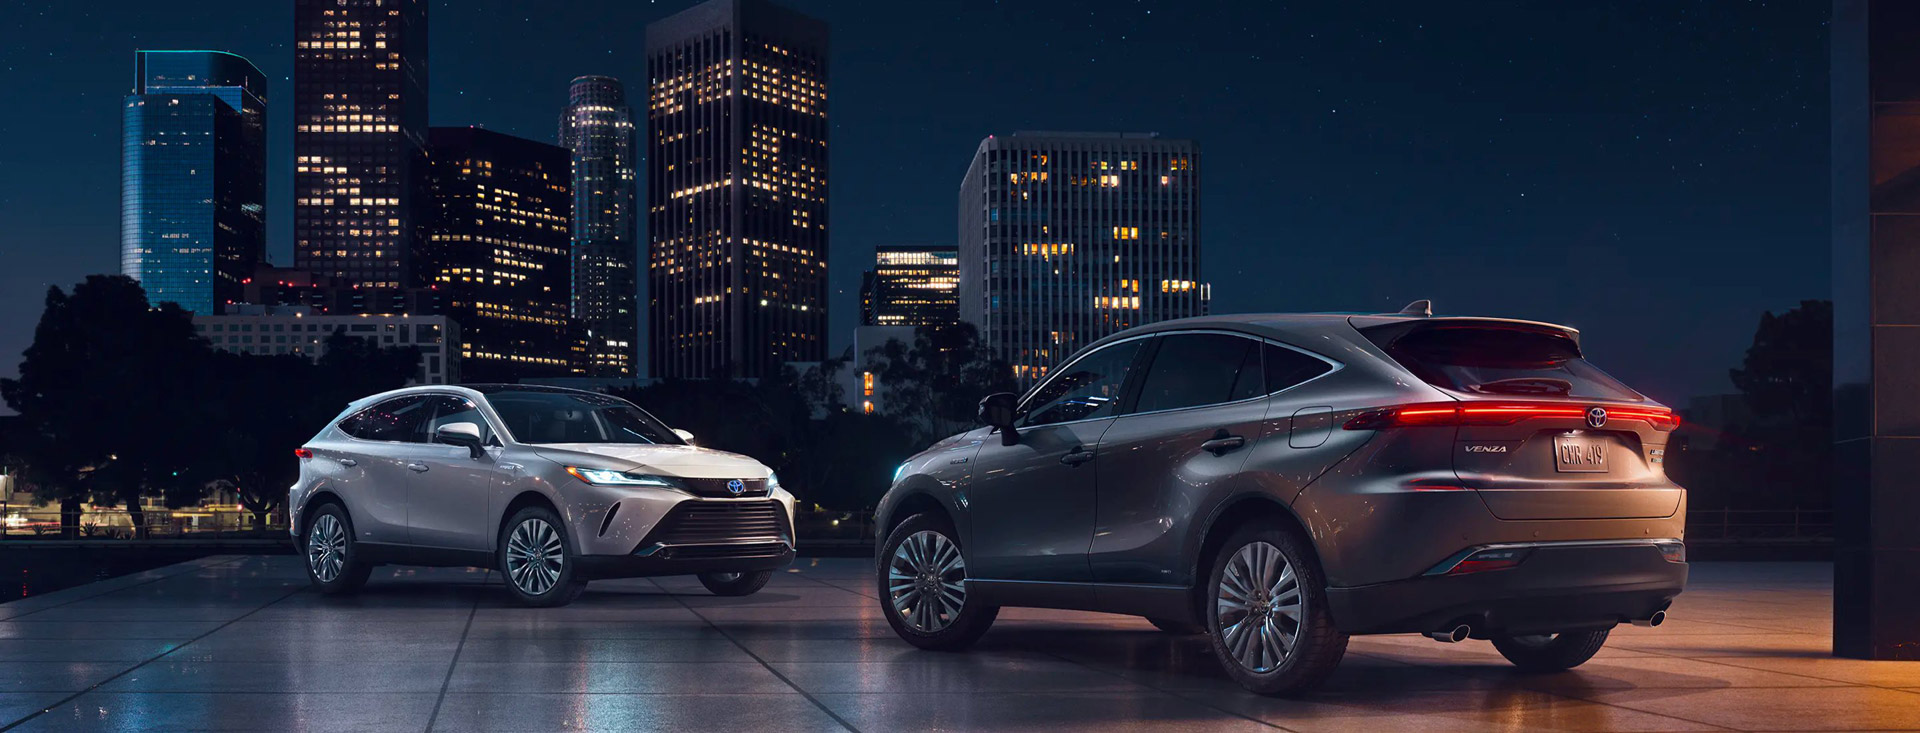 The All-New 2021 Venza